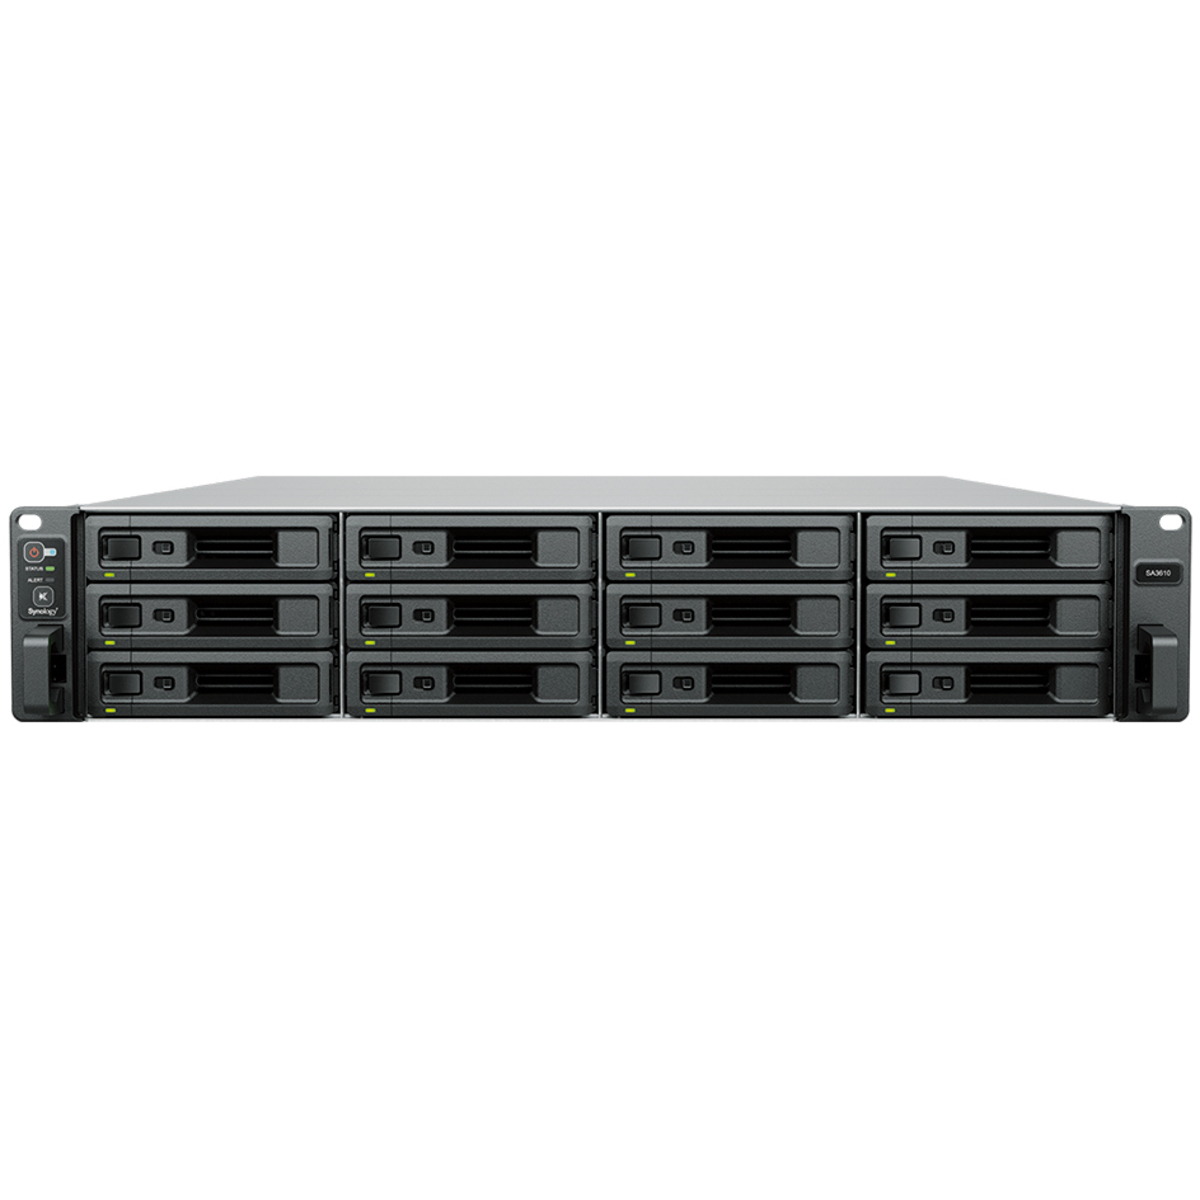 Synology RackStation SA3410 80tb 12-Bay RackMount Large Business / Enterprise NAS - Network Attached Storage Device 8x10tb Seagate EXOS X18 ST10000NM018G 3.5 7200rpm SATA 6Gb/s HDD ENTERPRISE Class Drives Installed - Burn-In Tested RackStation SA3410